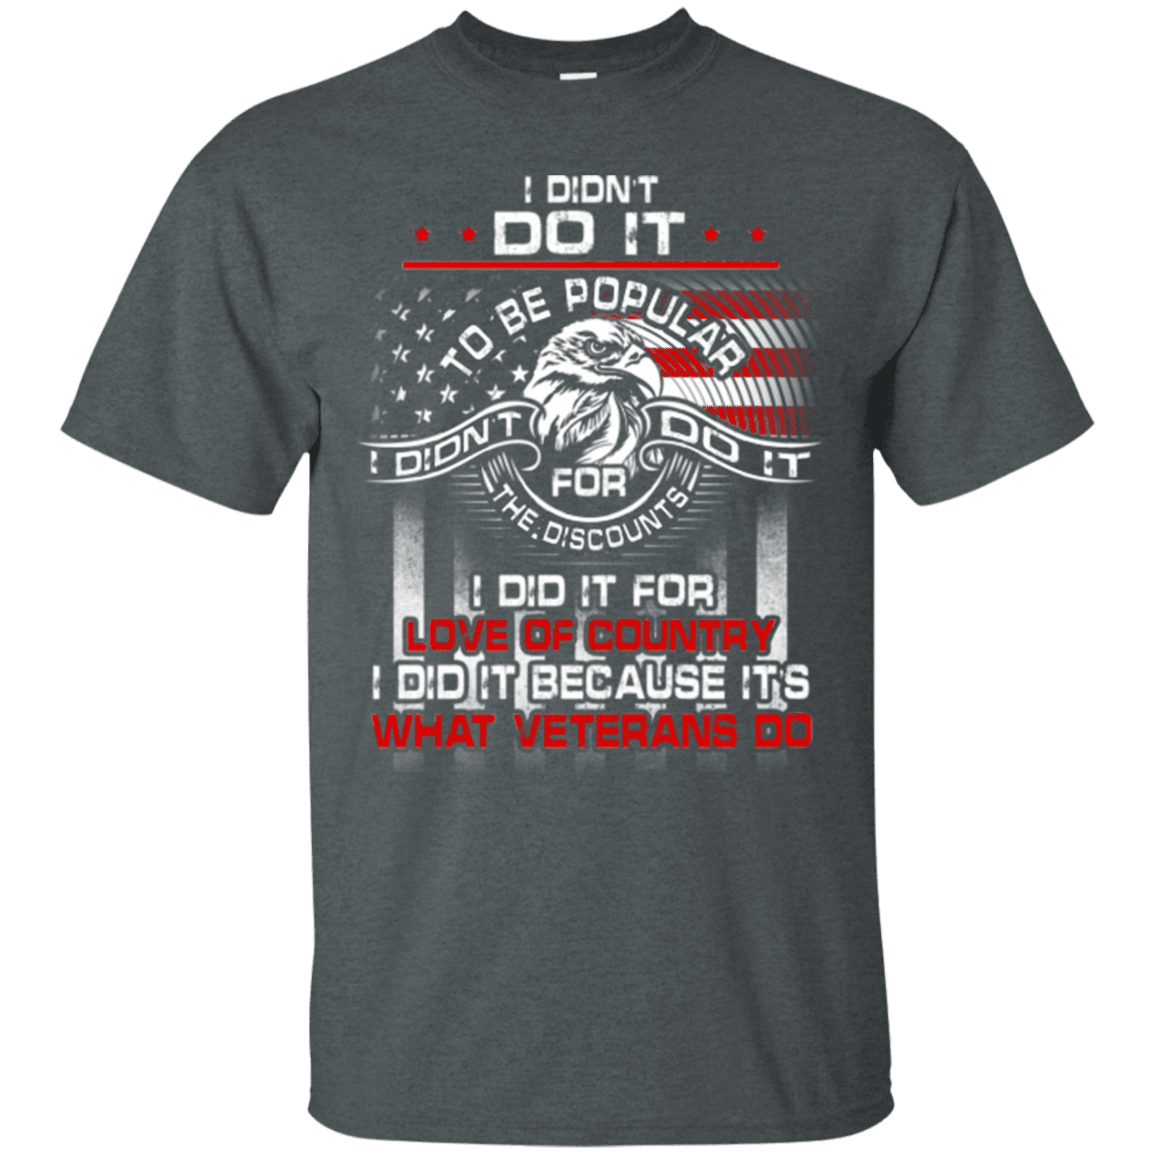 Military T-Shirt "I DID IT BECAUSE ITS WHAT VETERANS DO"-TShirt-General-Veterans Nation